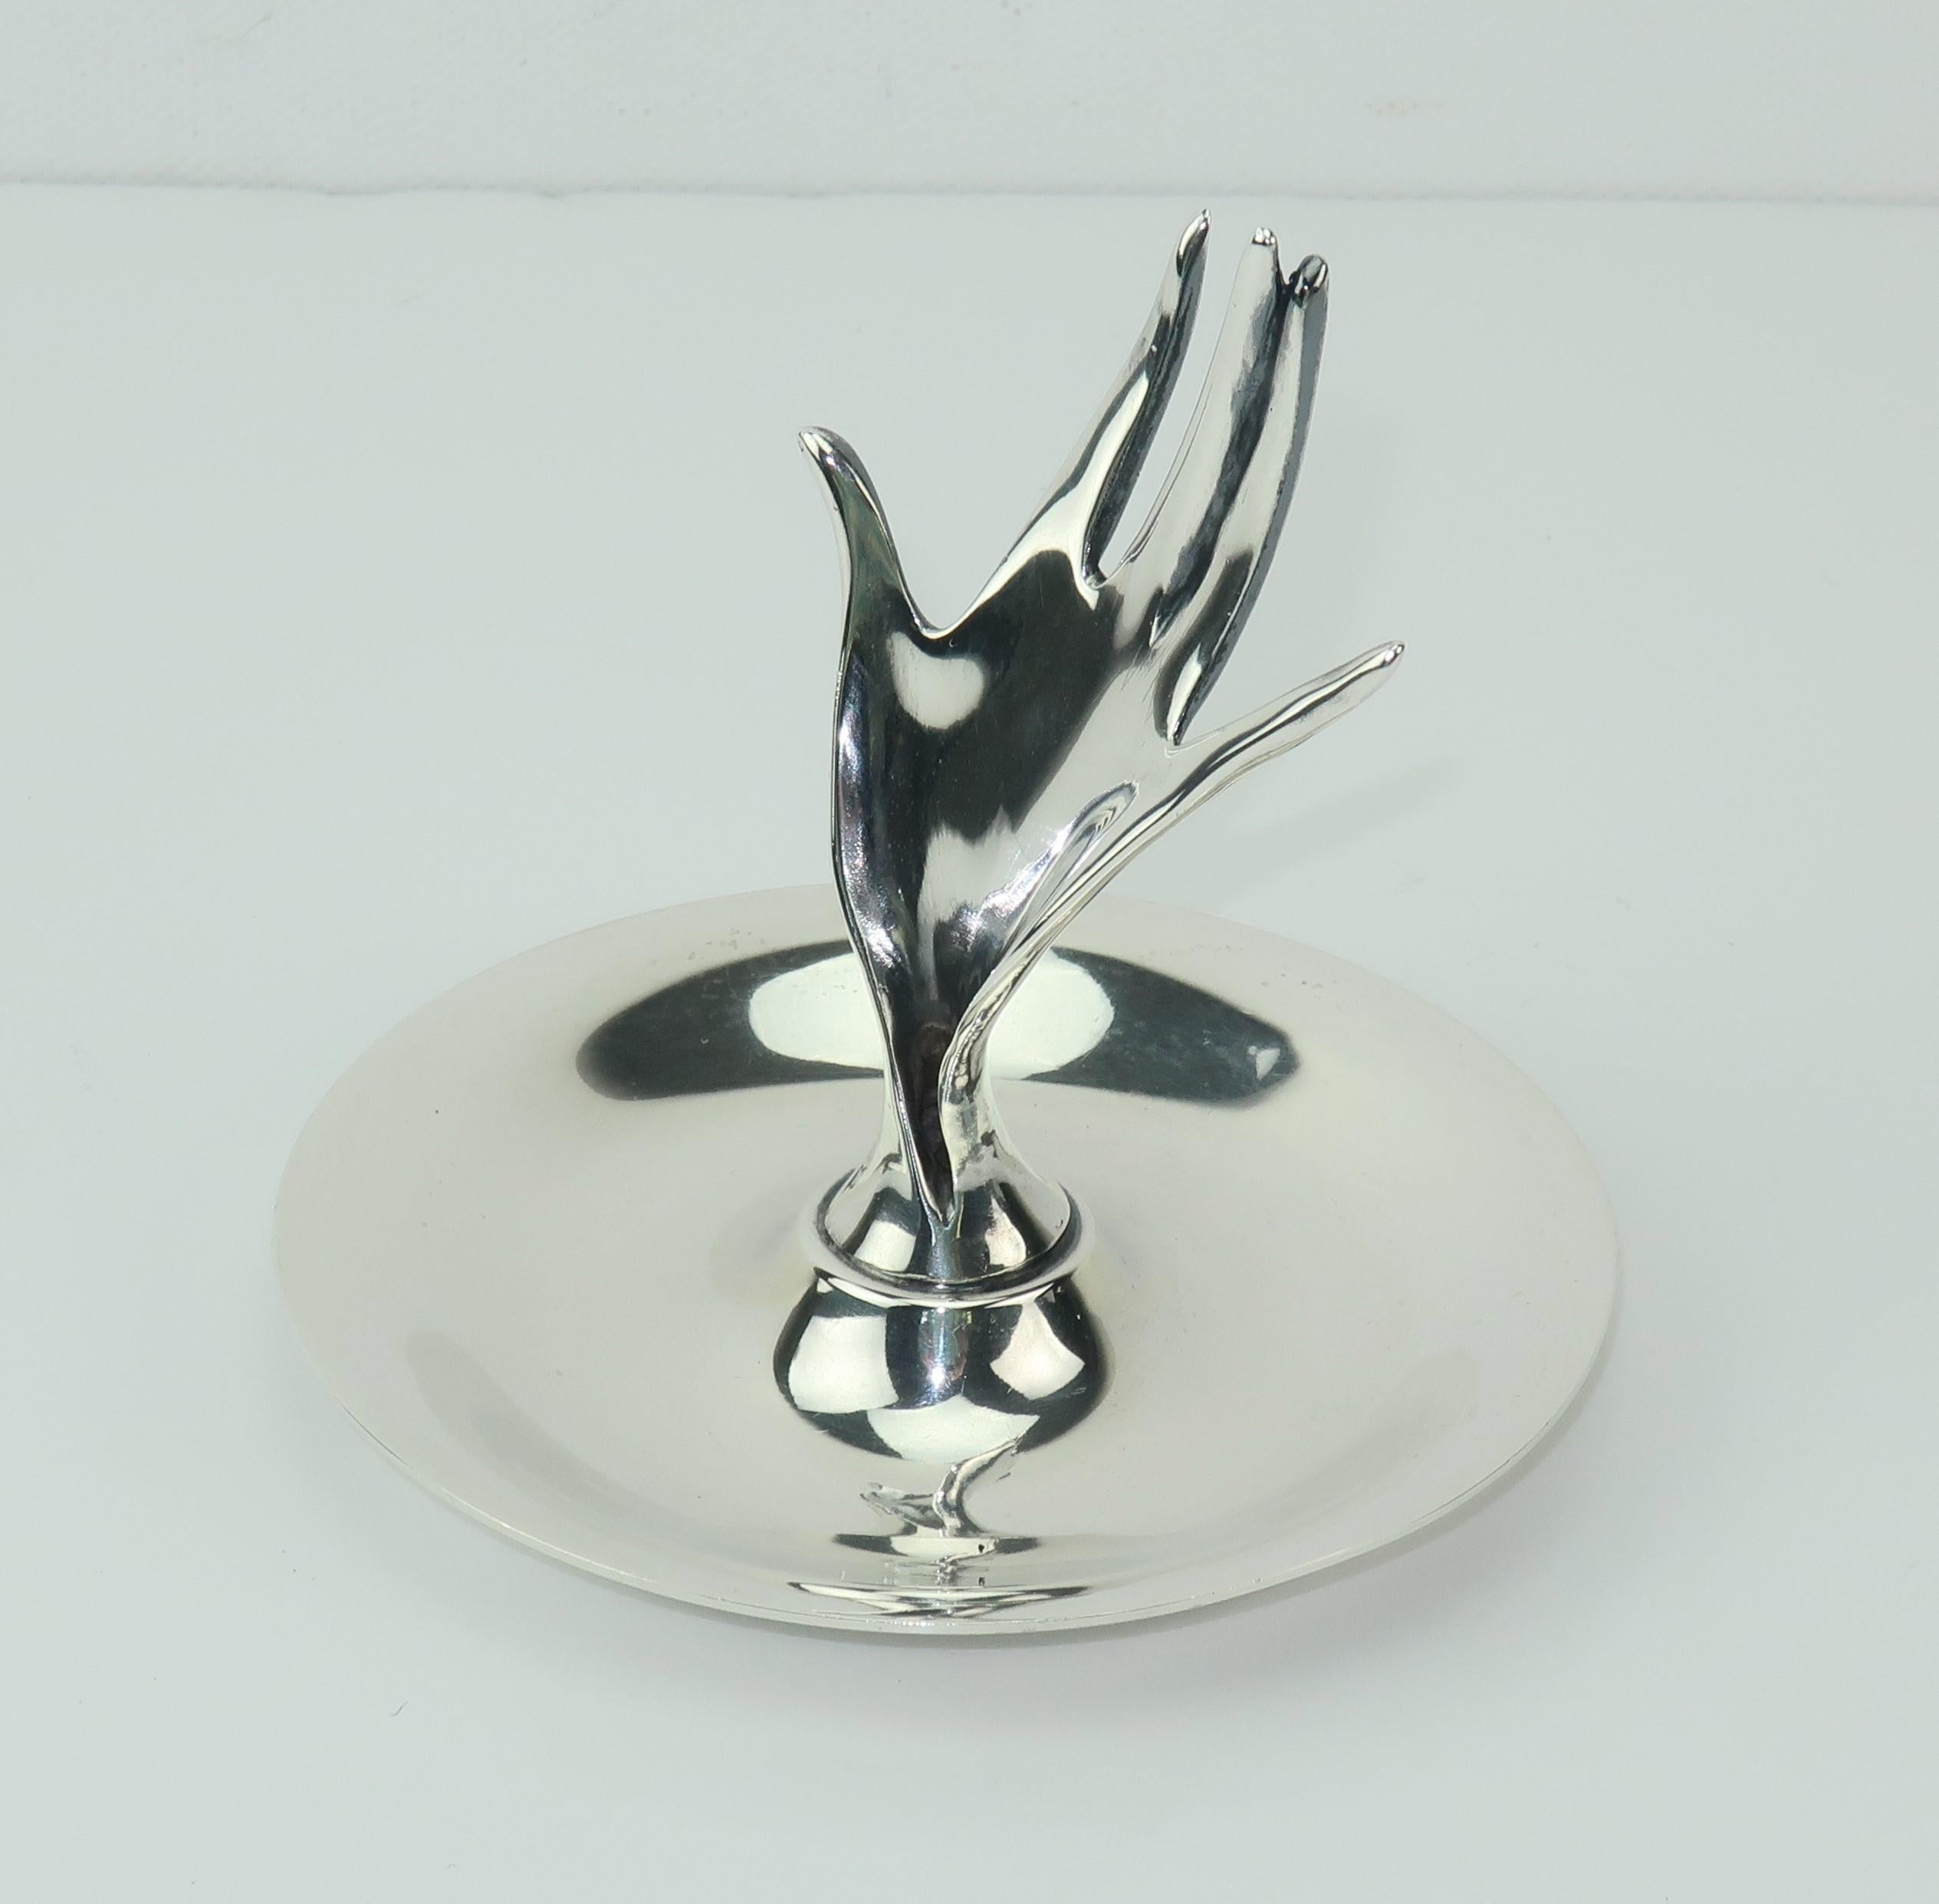 Tiffany & Company's 1950's sterling silver ring holder and pin dish depicting a stylized hand perfect for a vanity or bureau.  Beautifully detailed with the quality one would expect from Tiffany.  Measures 3.25